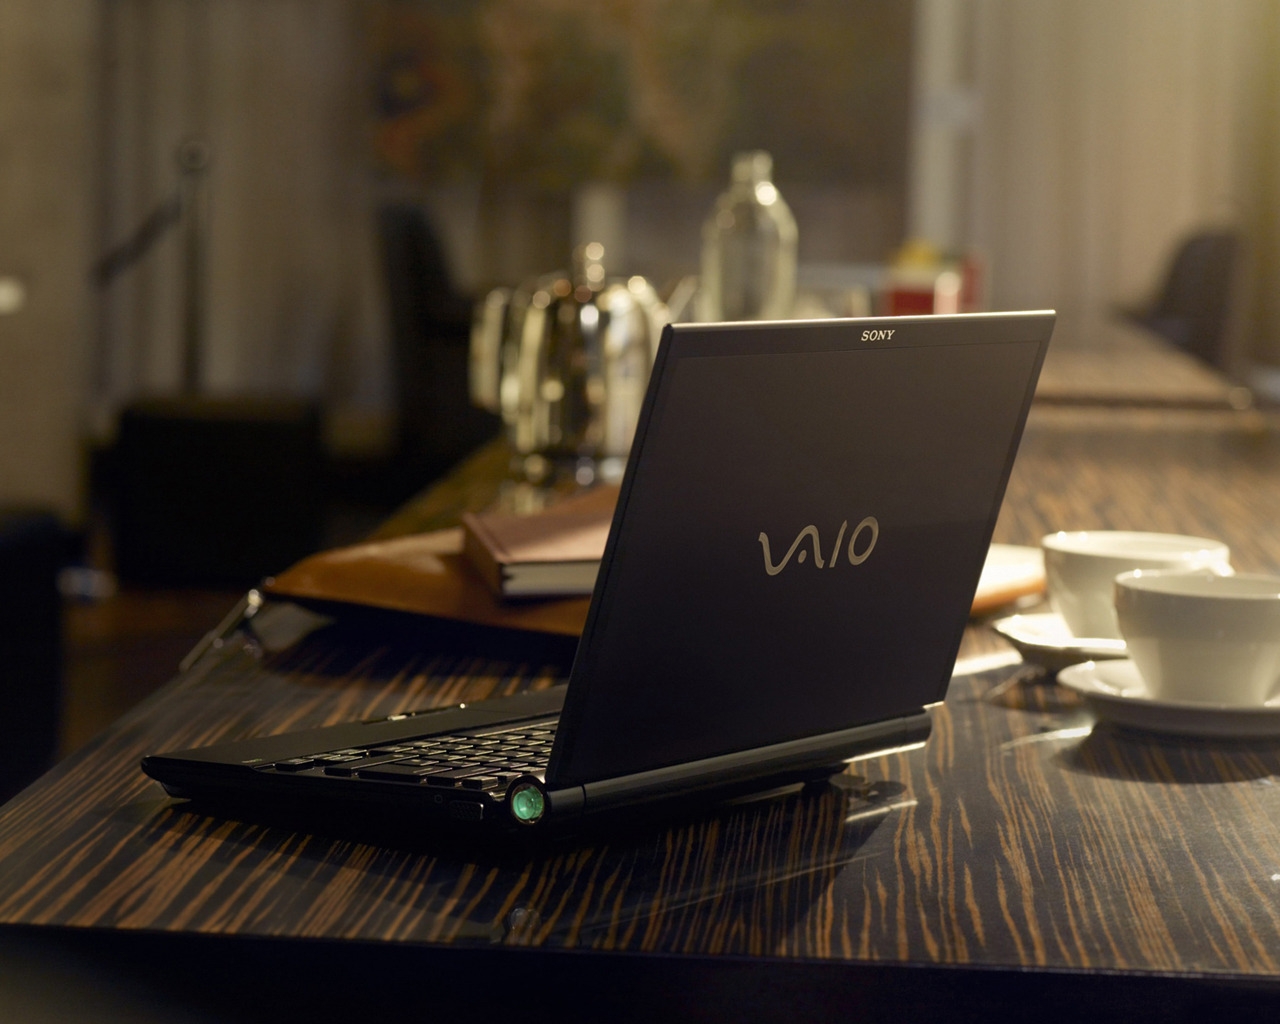 Vaio Notebook for 1280 x 1024 resolution